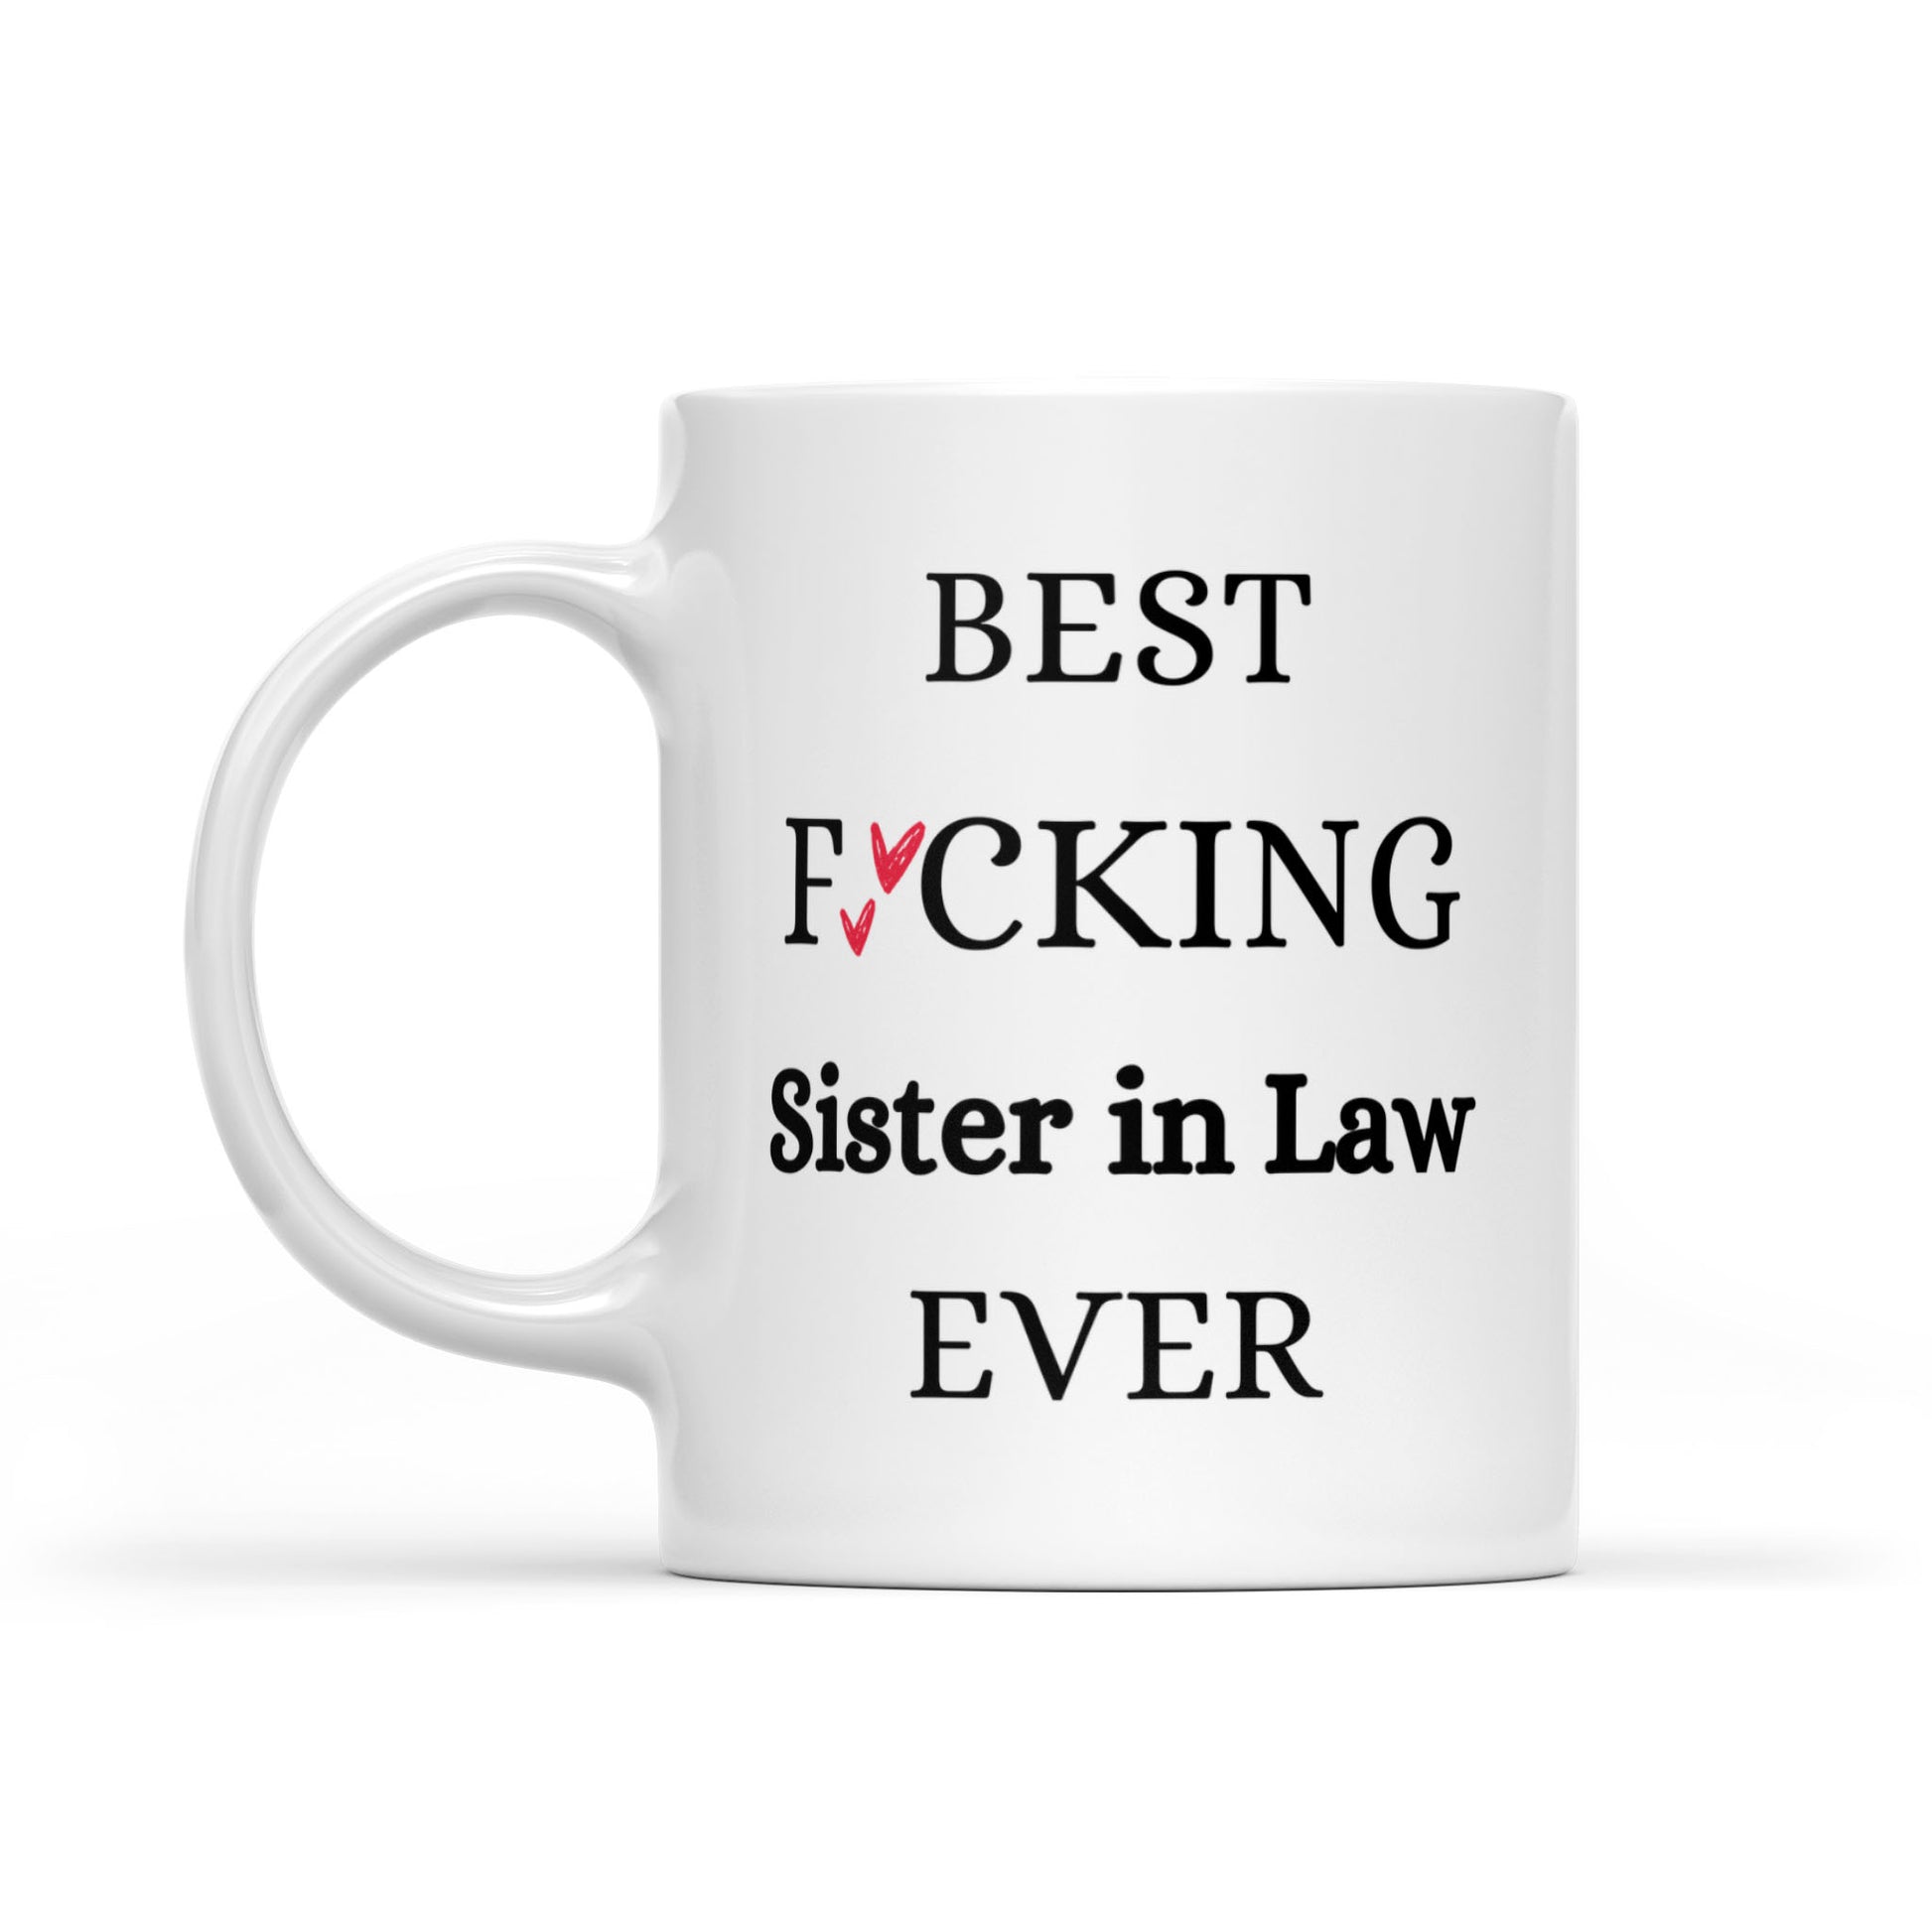 Best Fucking Sister In Law Ever Mug